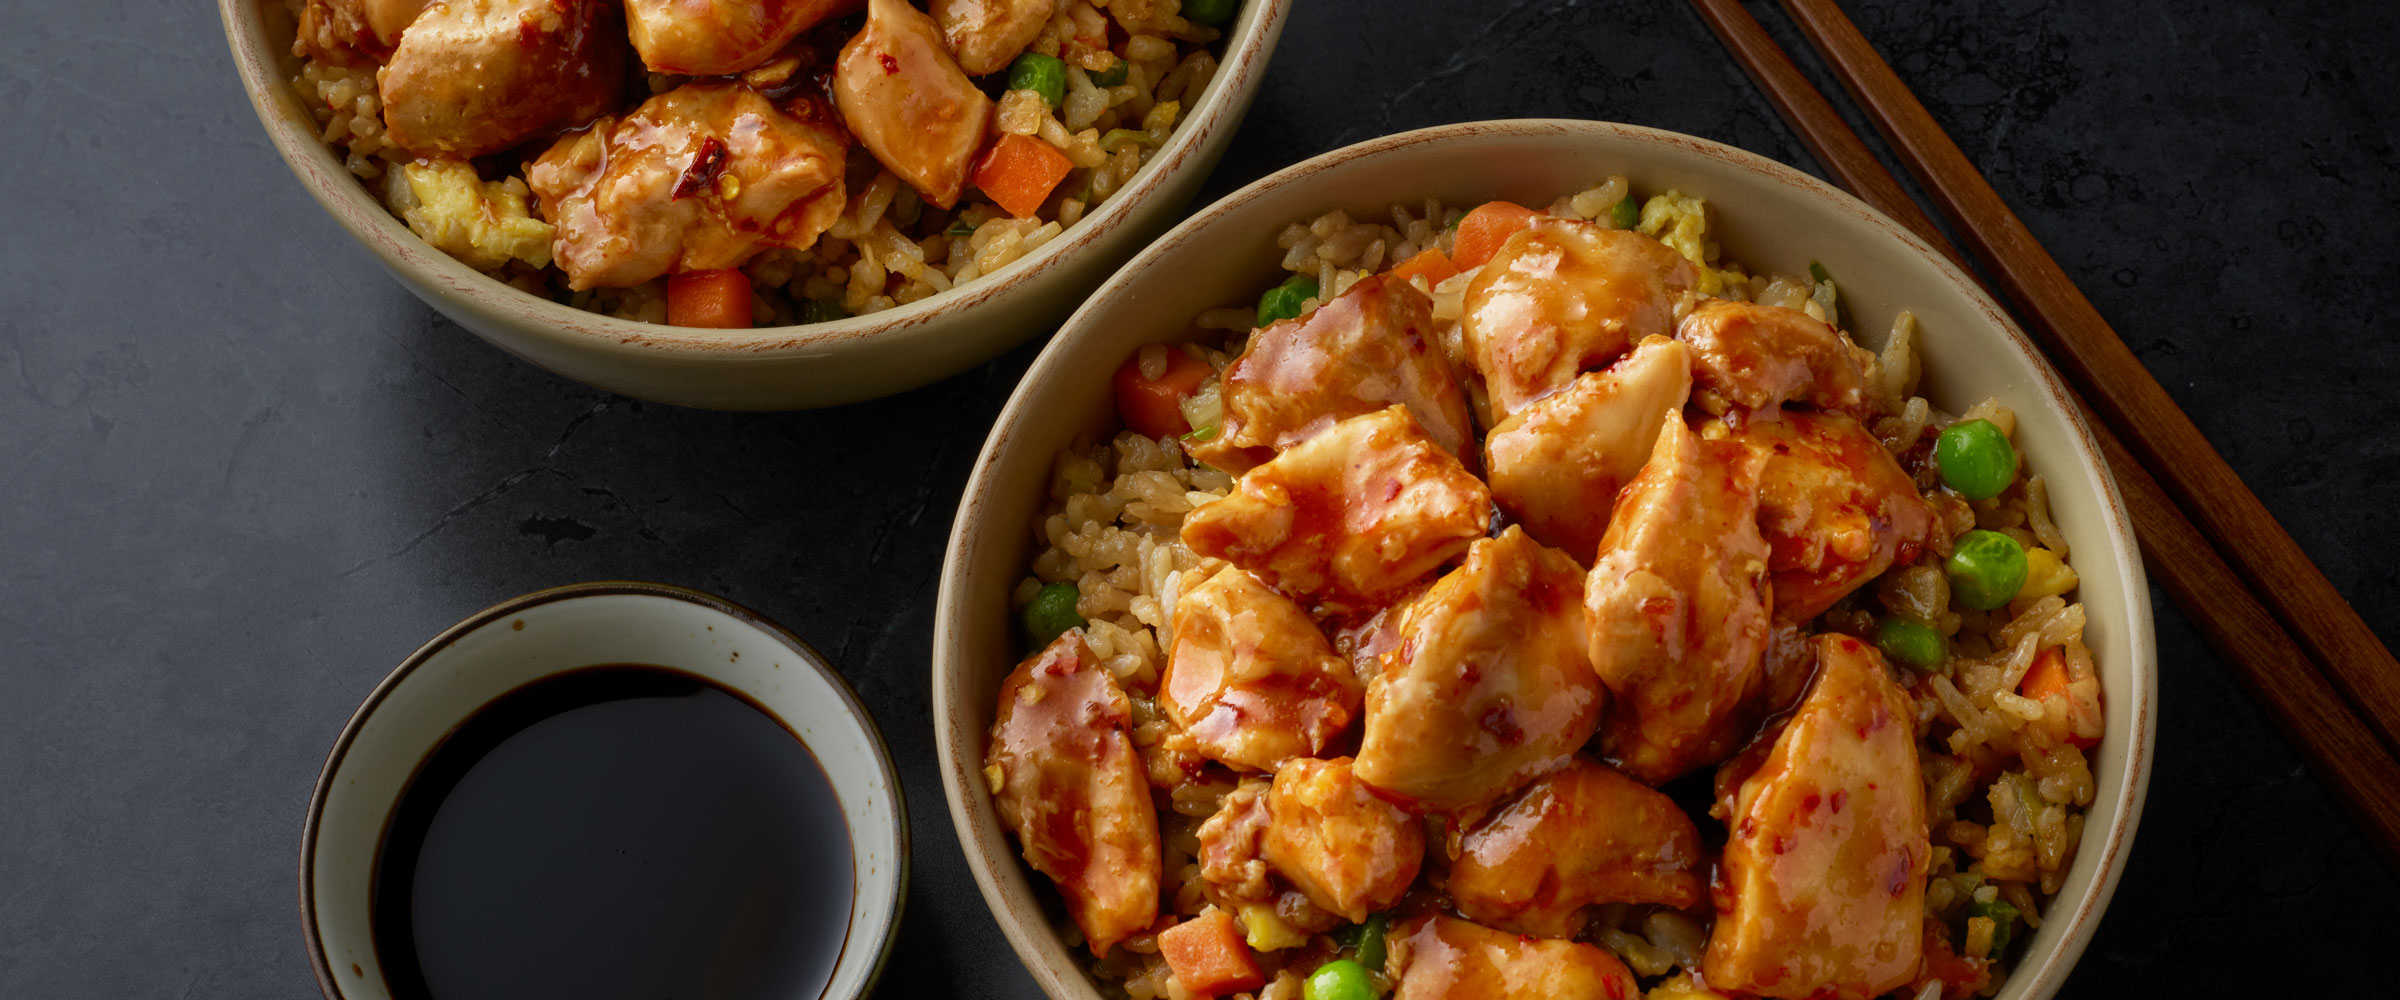 General Tso’s Chicken over Stir Fried Vegetable Fried Rice